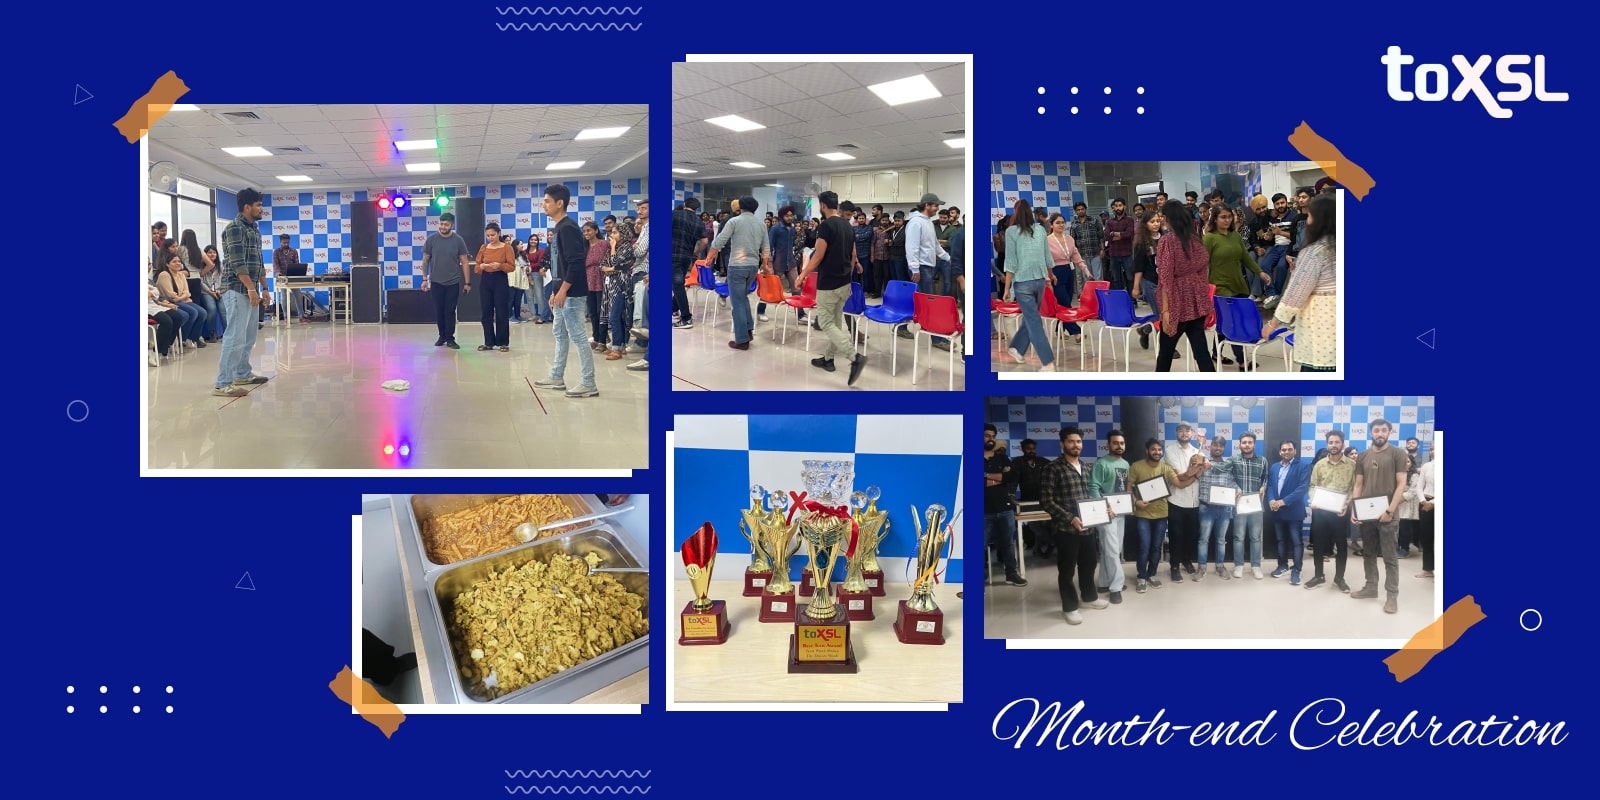 Month-End Celebration: Lifting Employees' Spirits Through Fun, Laughter, And Gratefulness